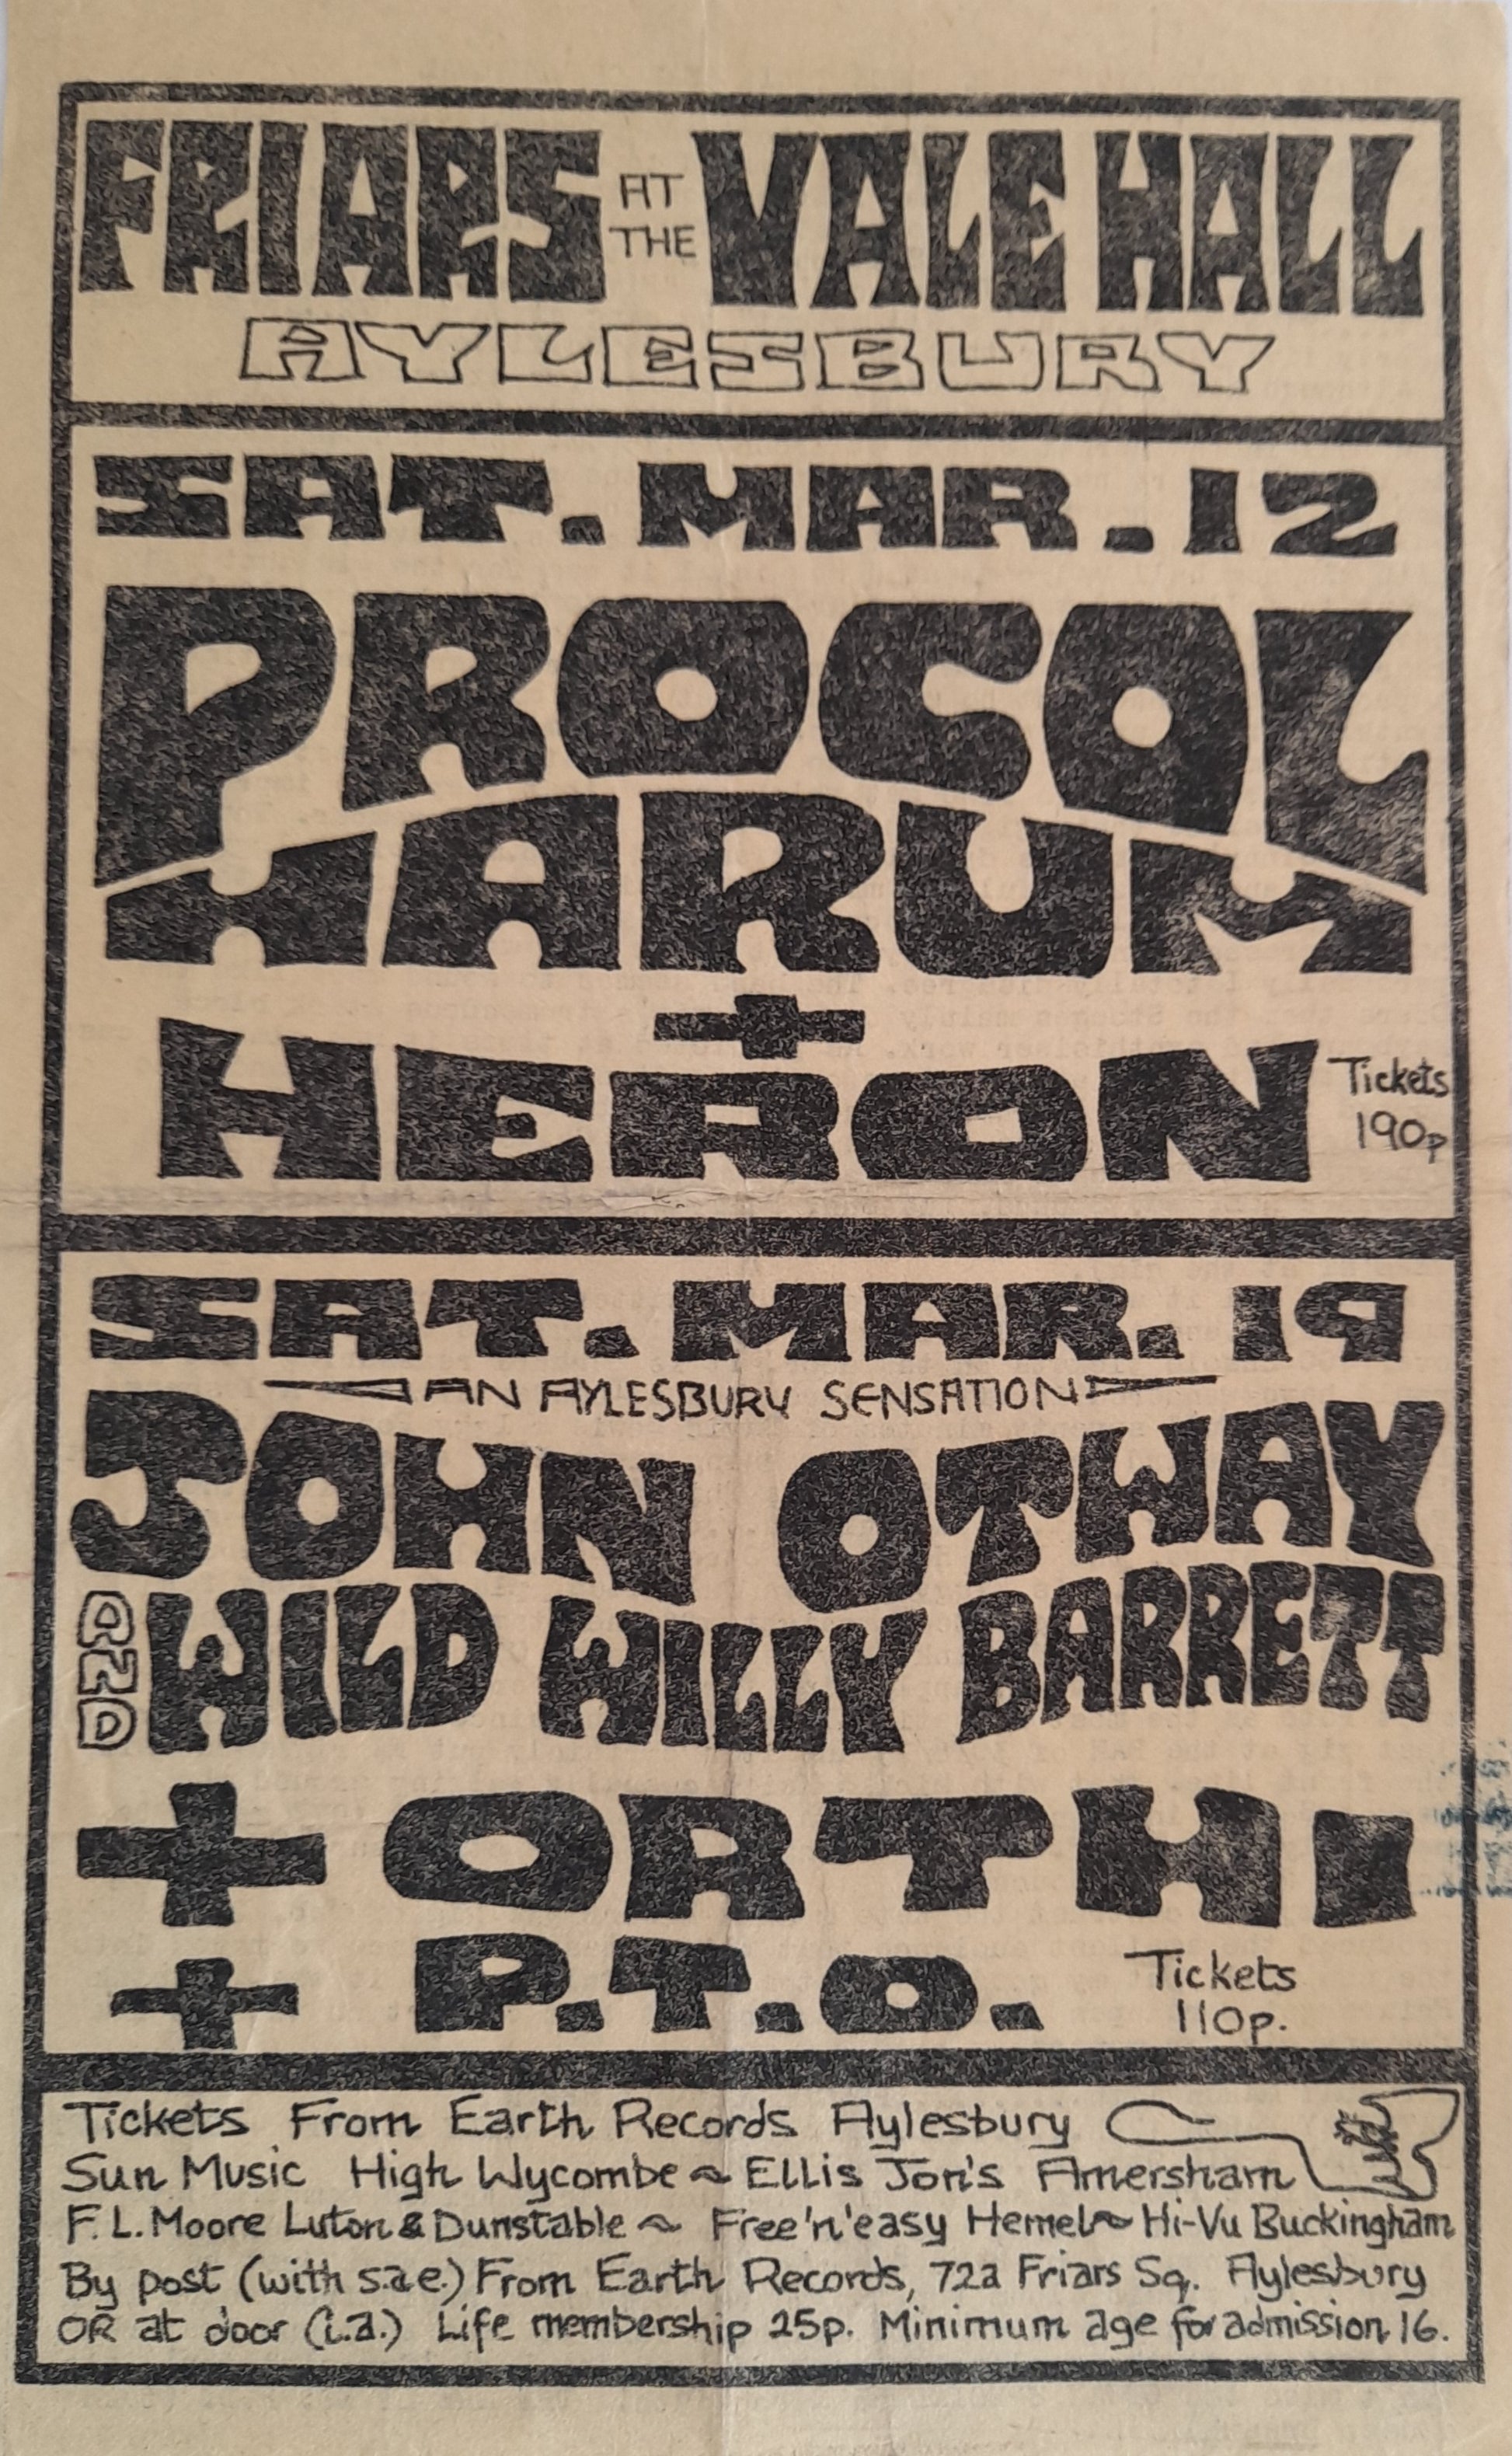 Procol Harum + Heron at Friars at the Vale Hall Aylesbury 1977 Flyer/Newsletter